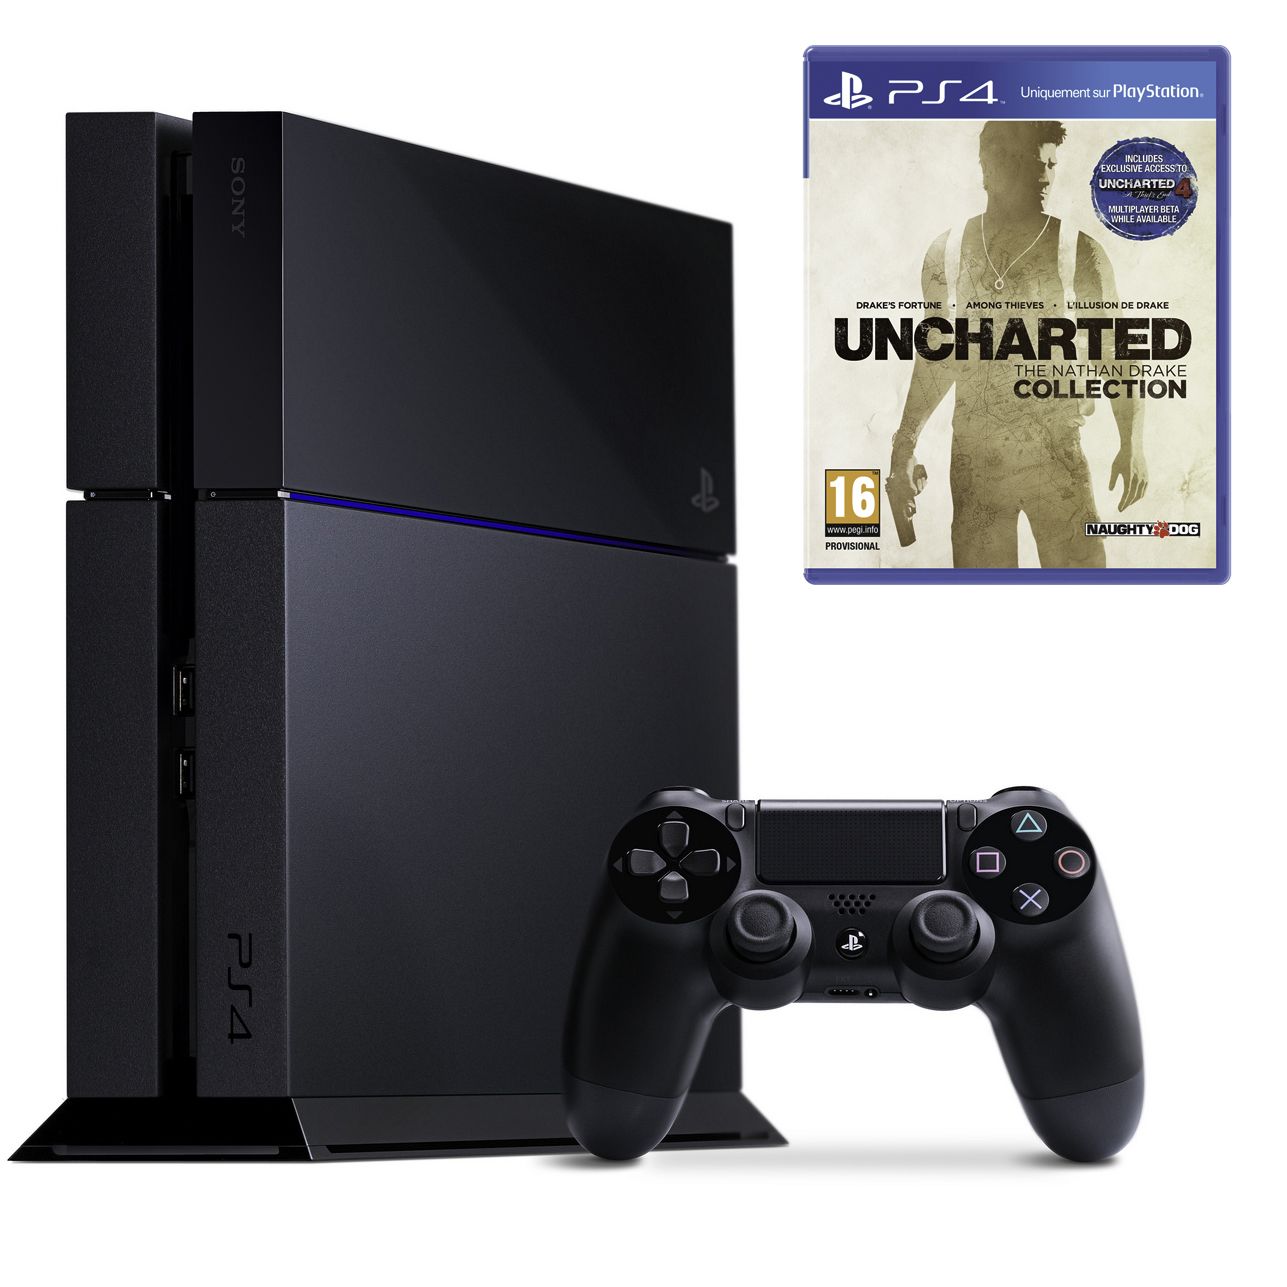 Consola Sony PlayStation 4, 500 GB + Joc Uncharted: The Nathan Drake Collection